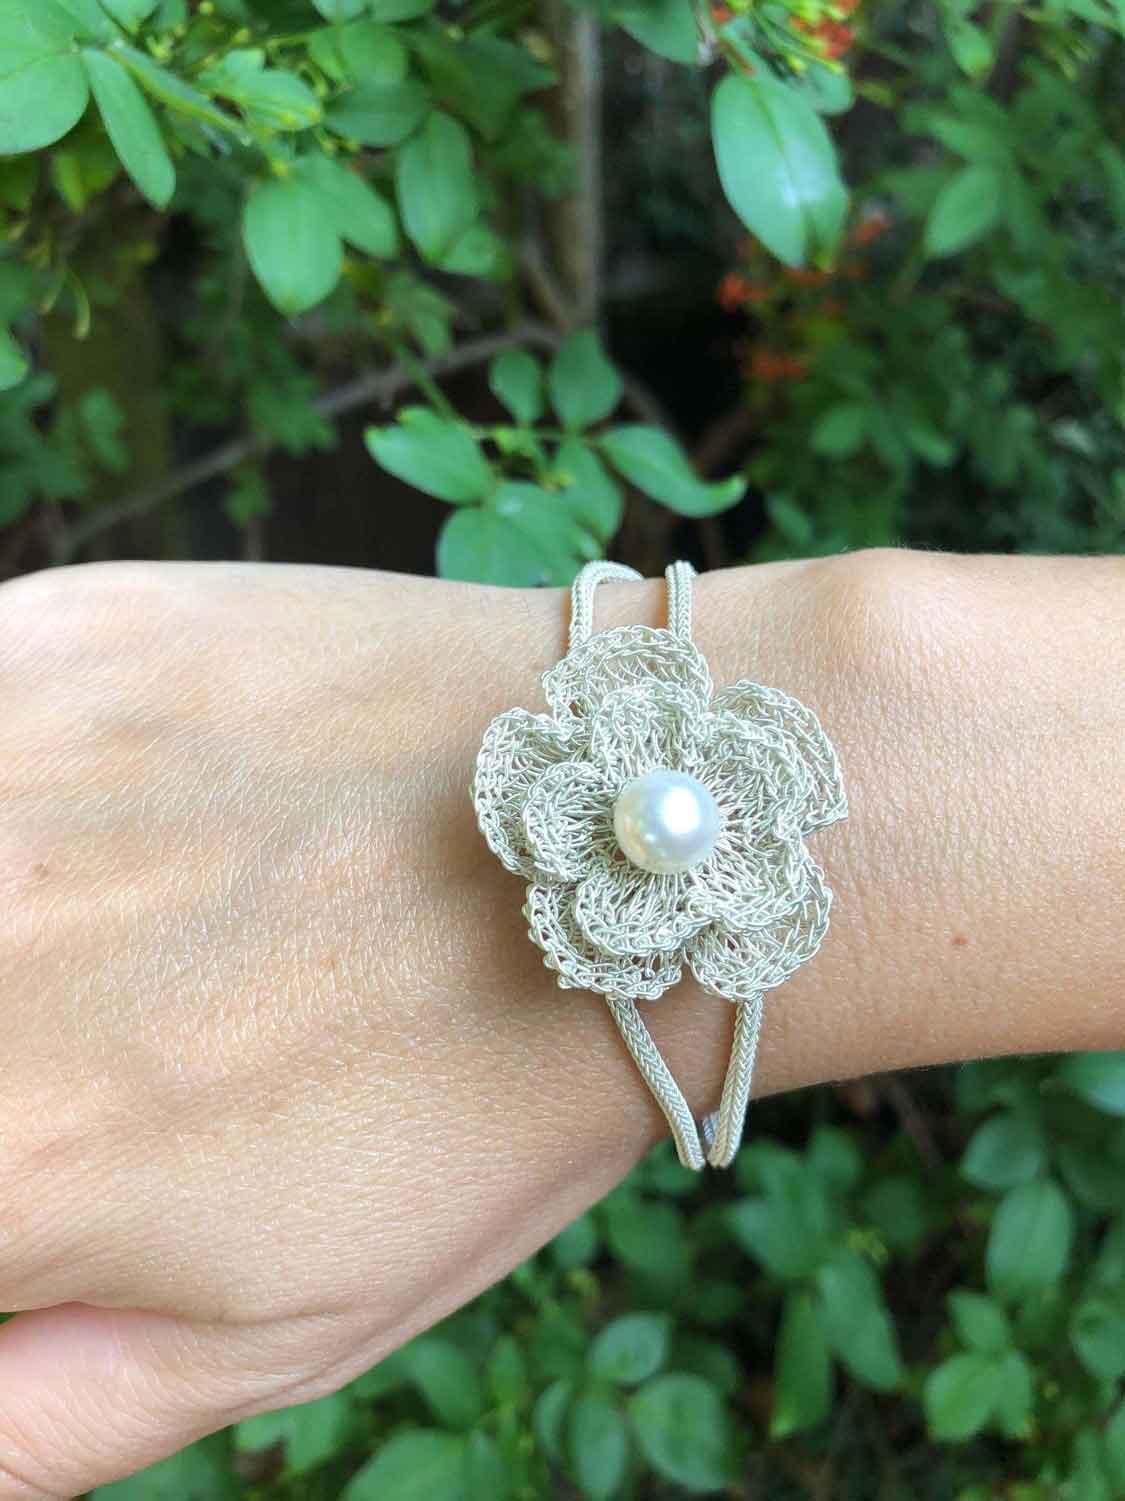 Elegant Baroque Pearl, Silver Flower Chain Bracelet, Wedding Gift for Women available at Moyoni Design